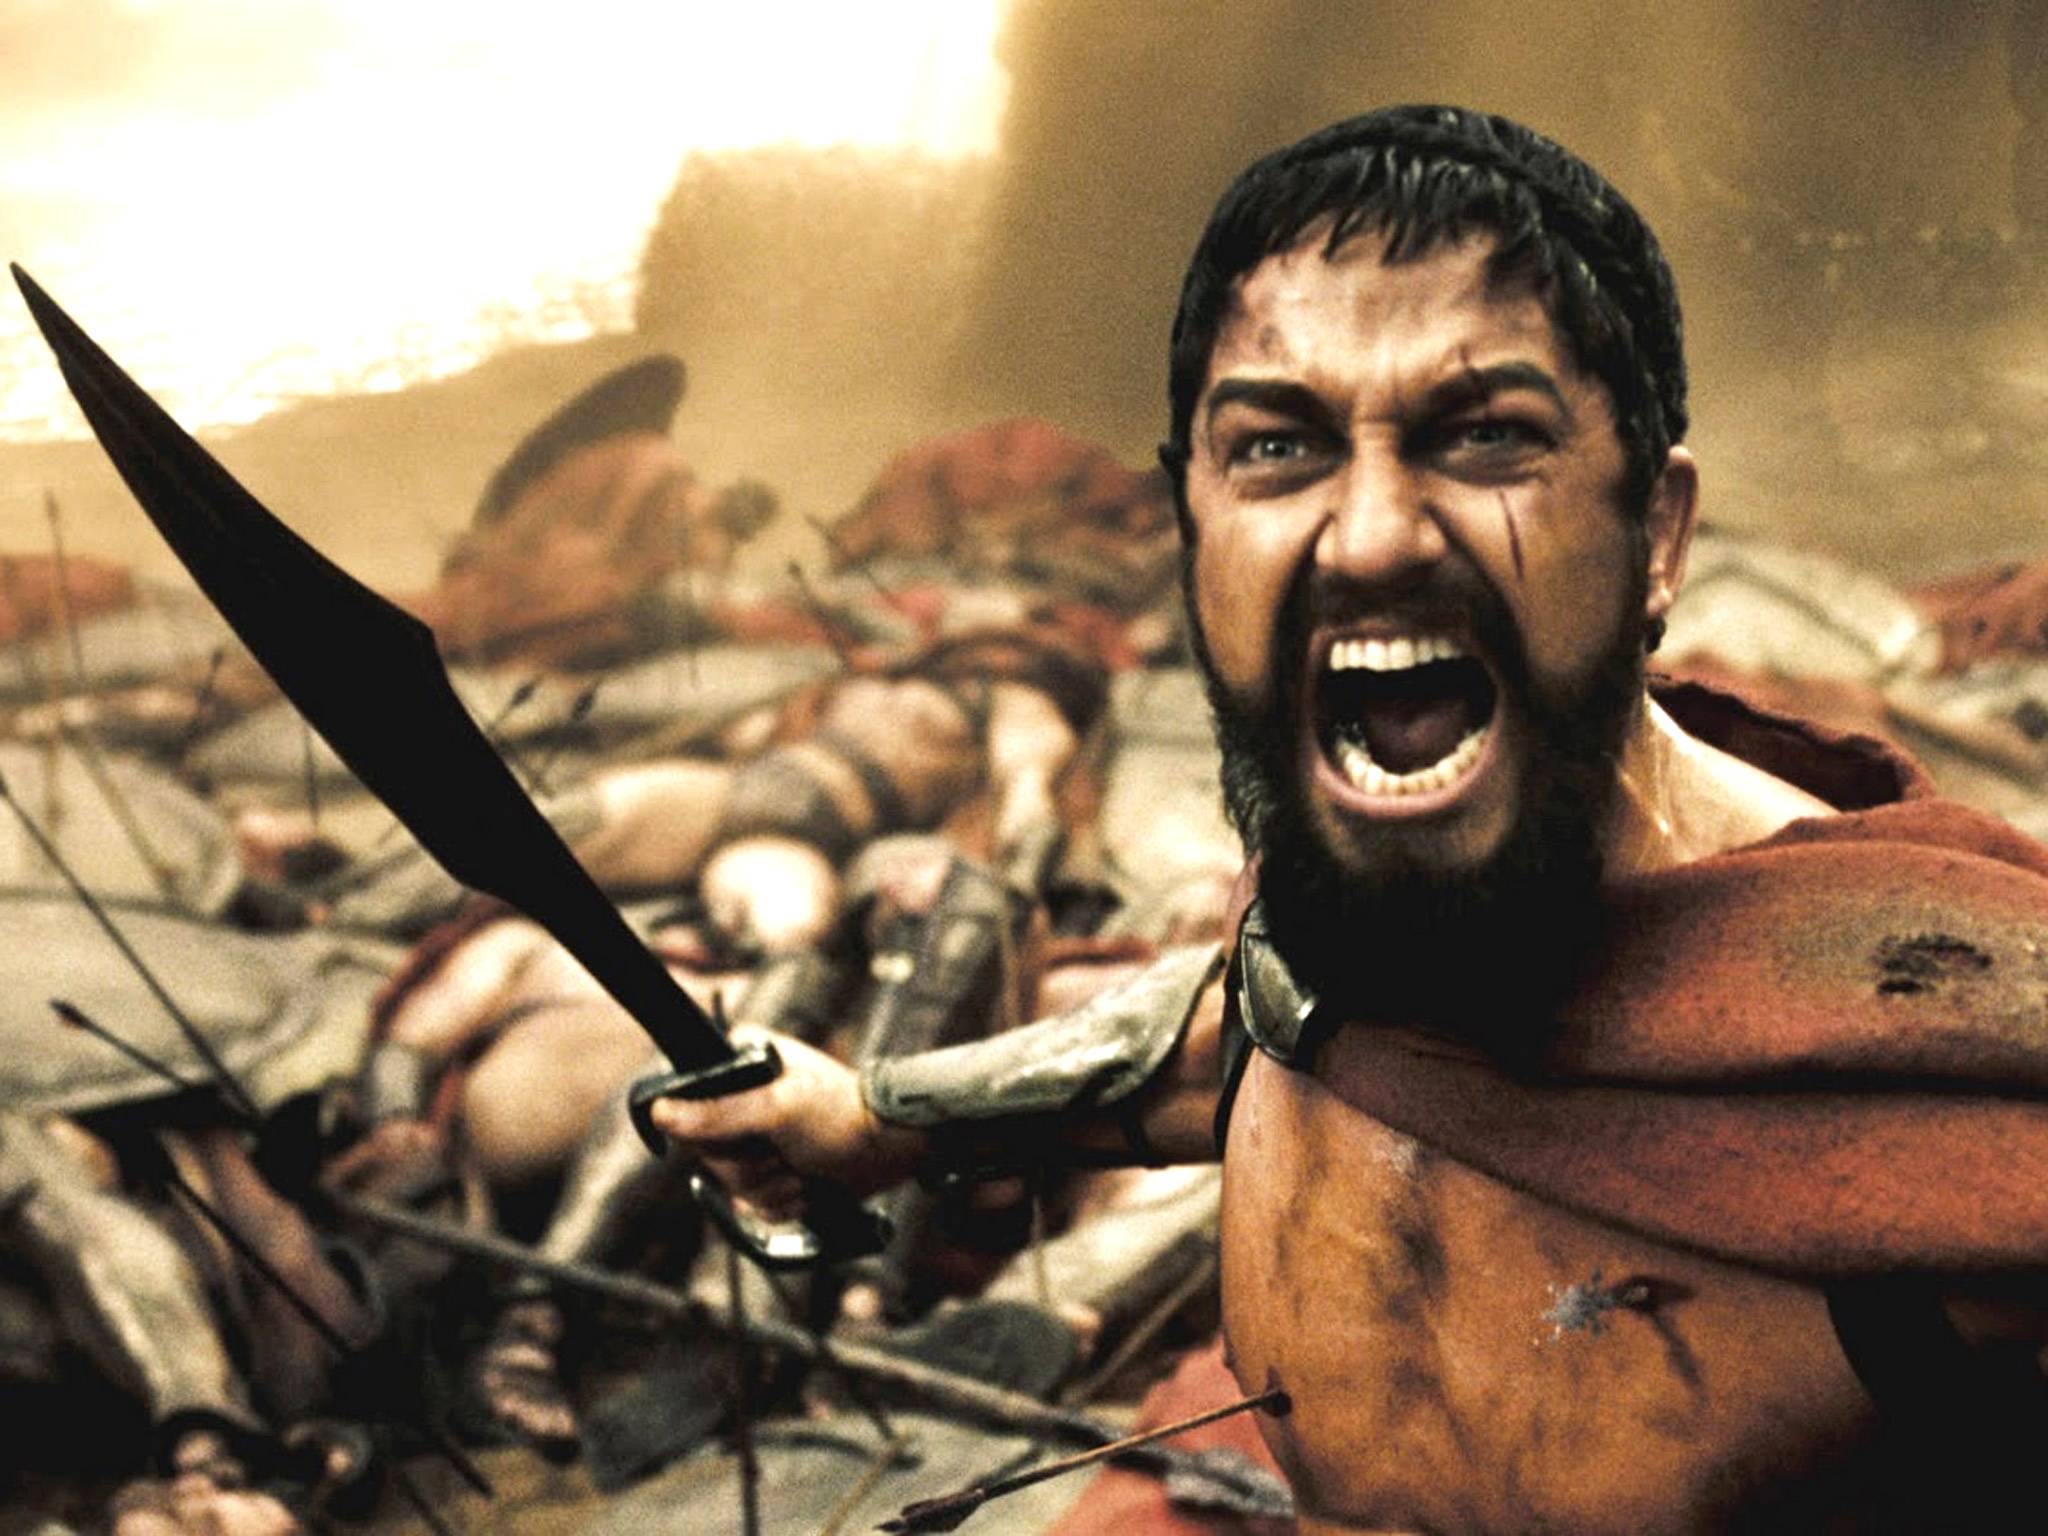 2006's '300', starring Gerard Butler (pictured), included 600 battlefield killings